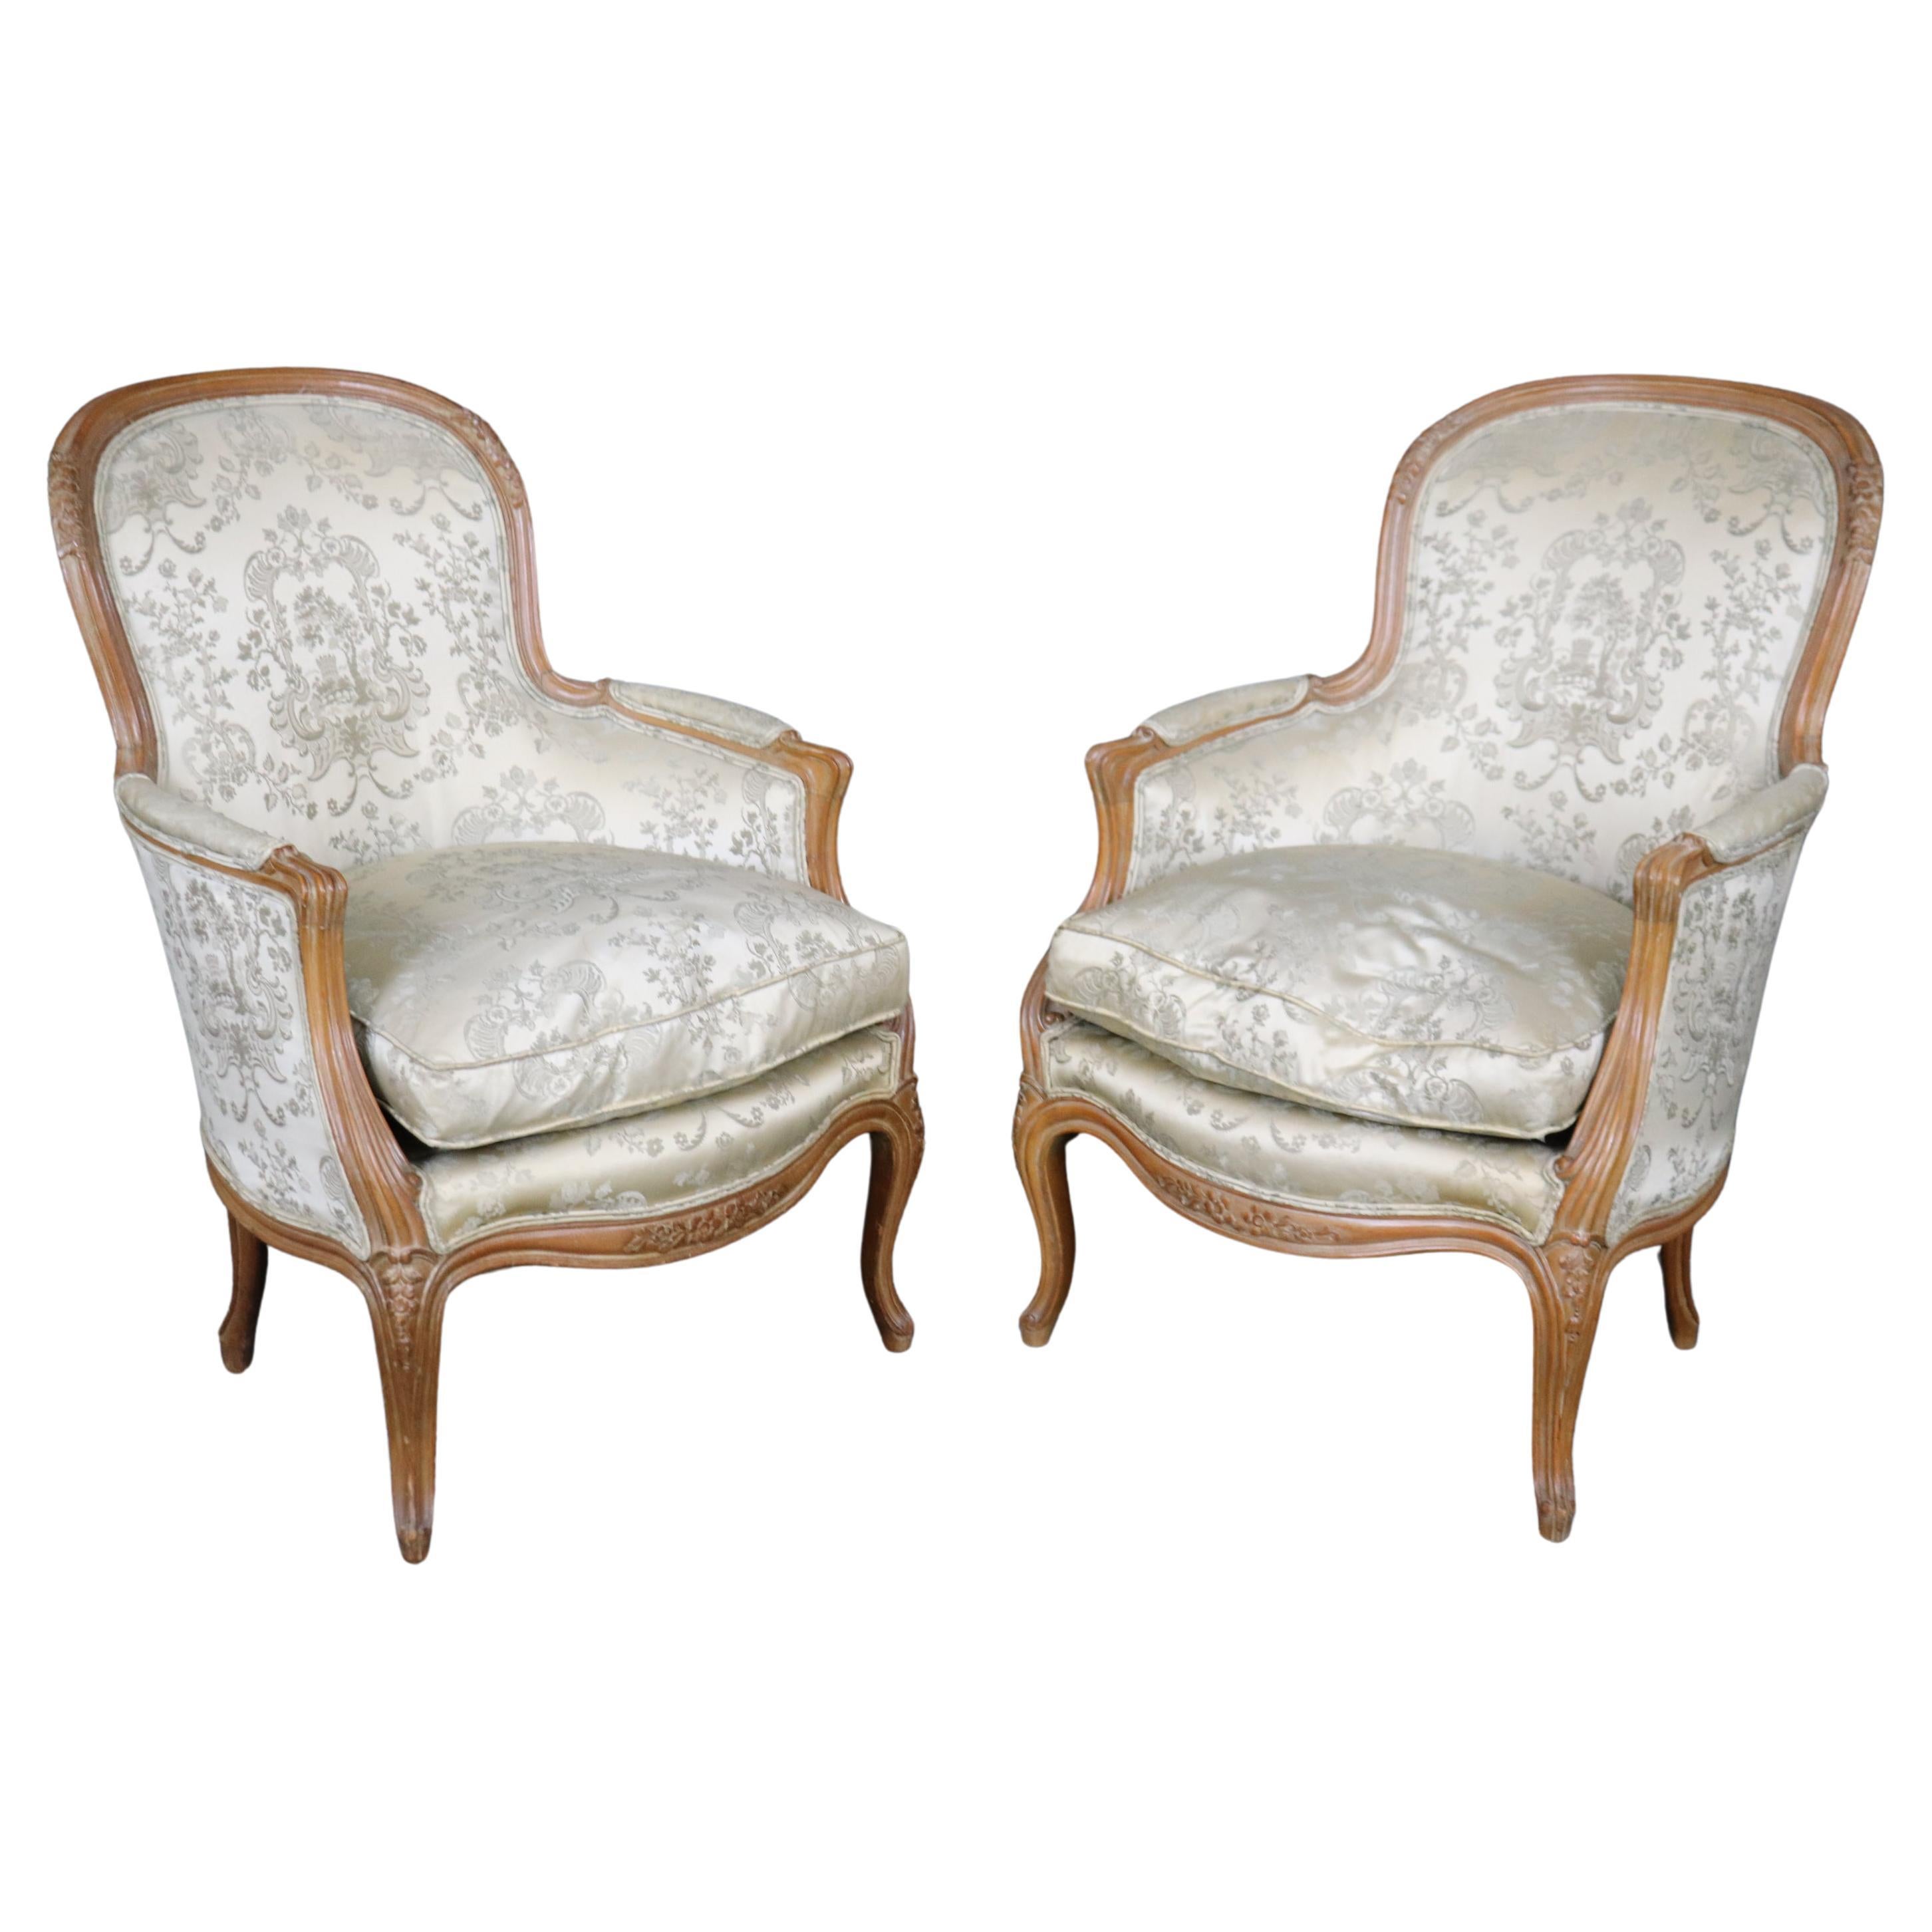 Pair of Gorgeous French Carved Louis XV Bergere Chairs Circa 1940s era